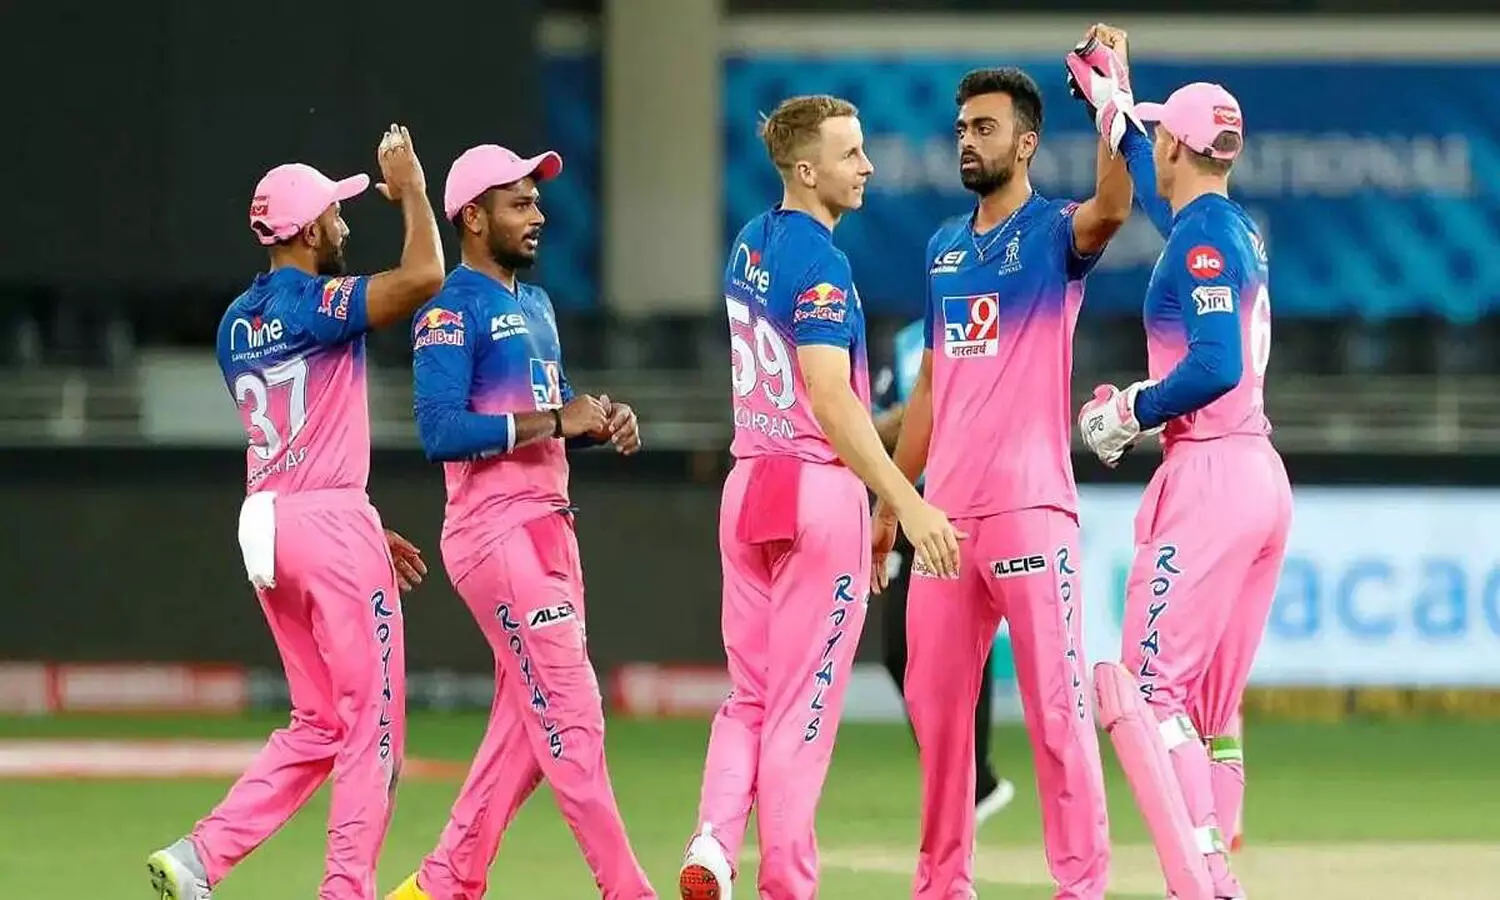 Rajasthan Royals donate ₹7.5 crore to help India fight Covid-19